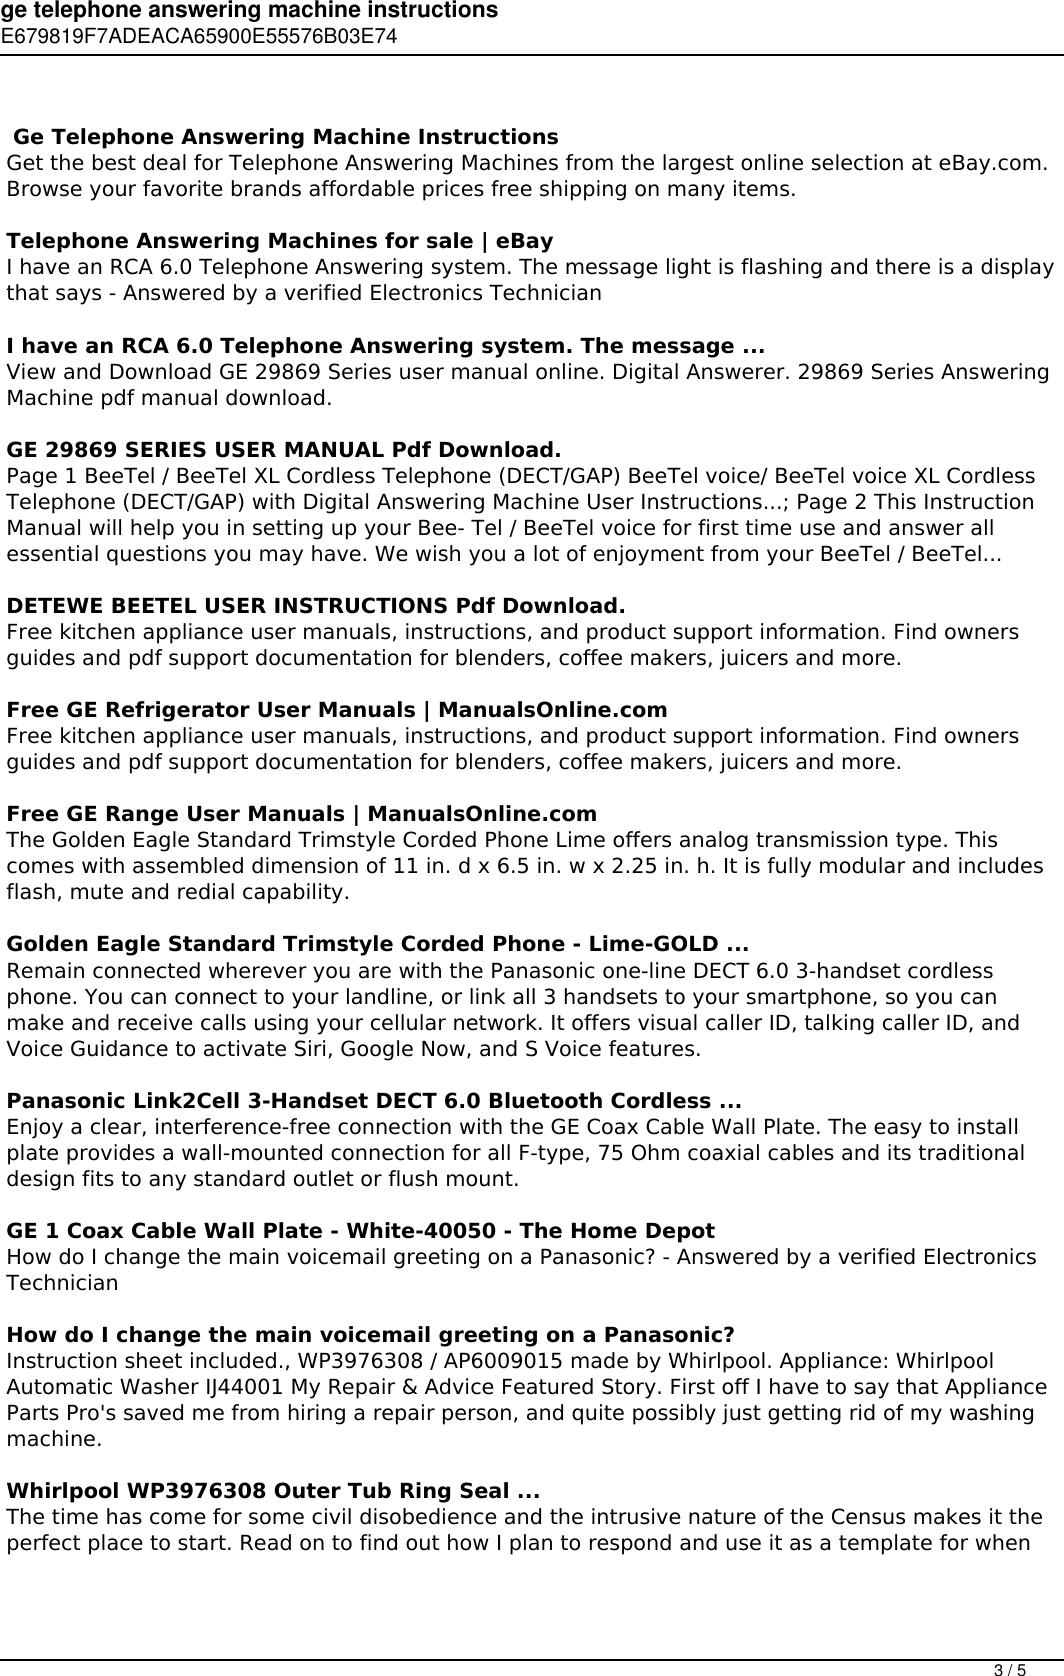 Page 3 of 5 - Ge Telephone Answering Machine Instructions